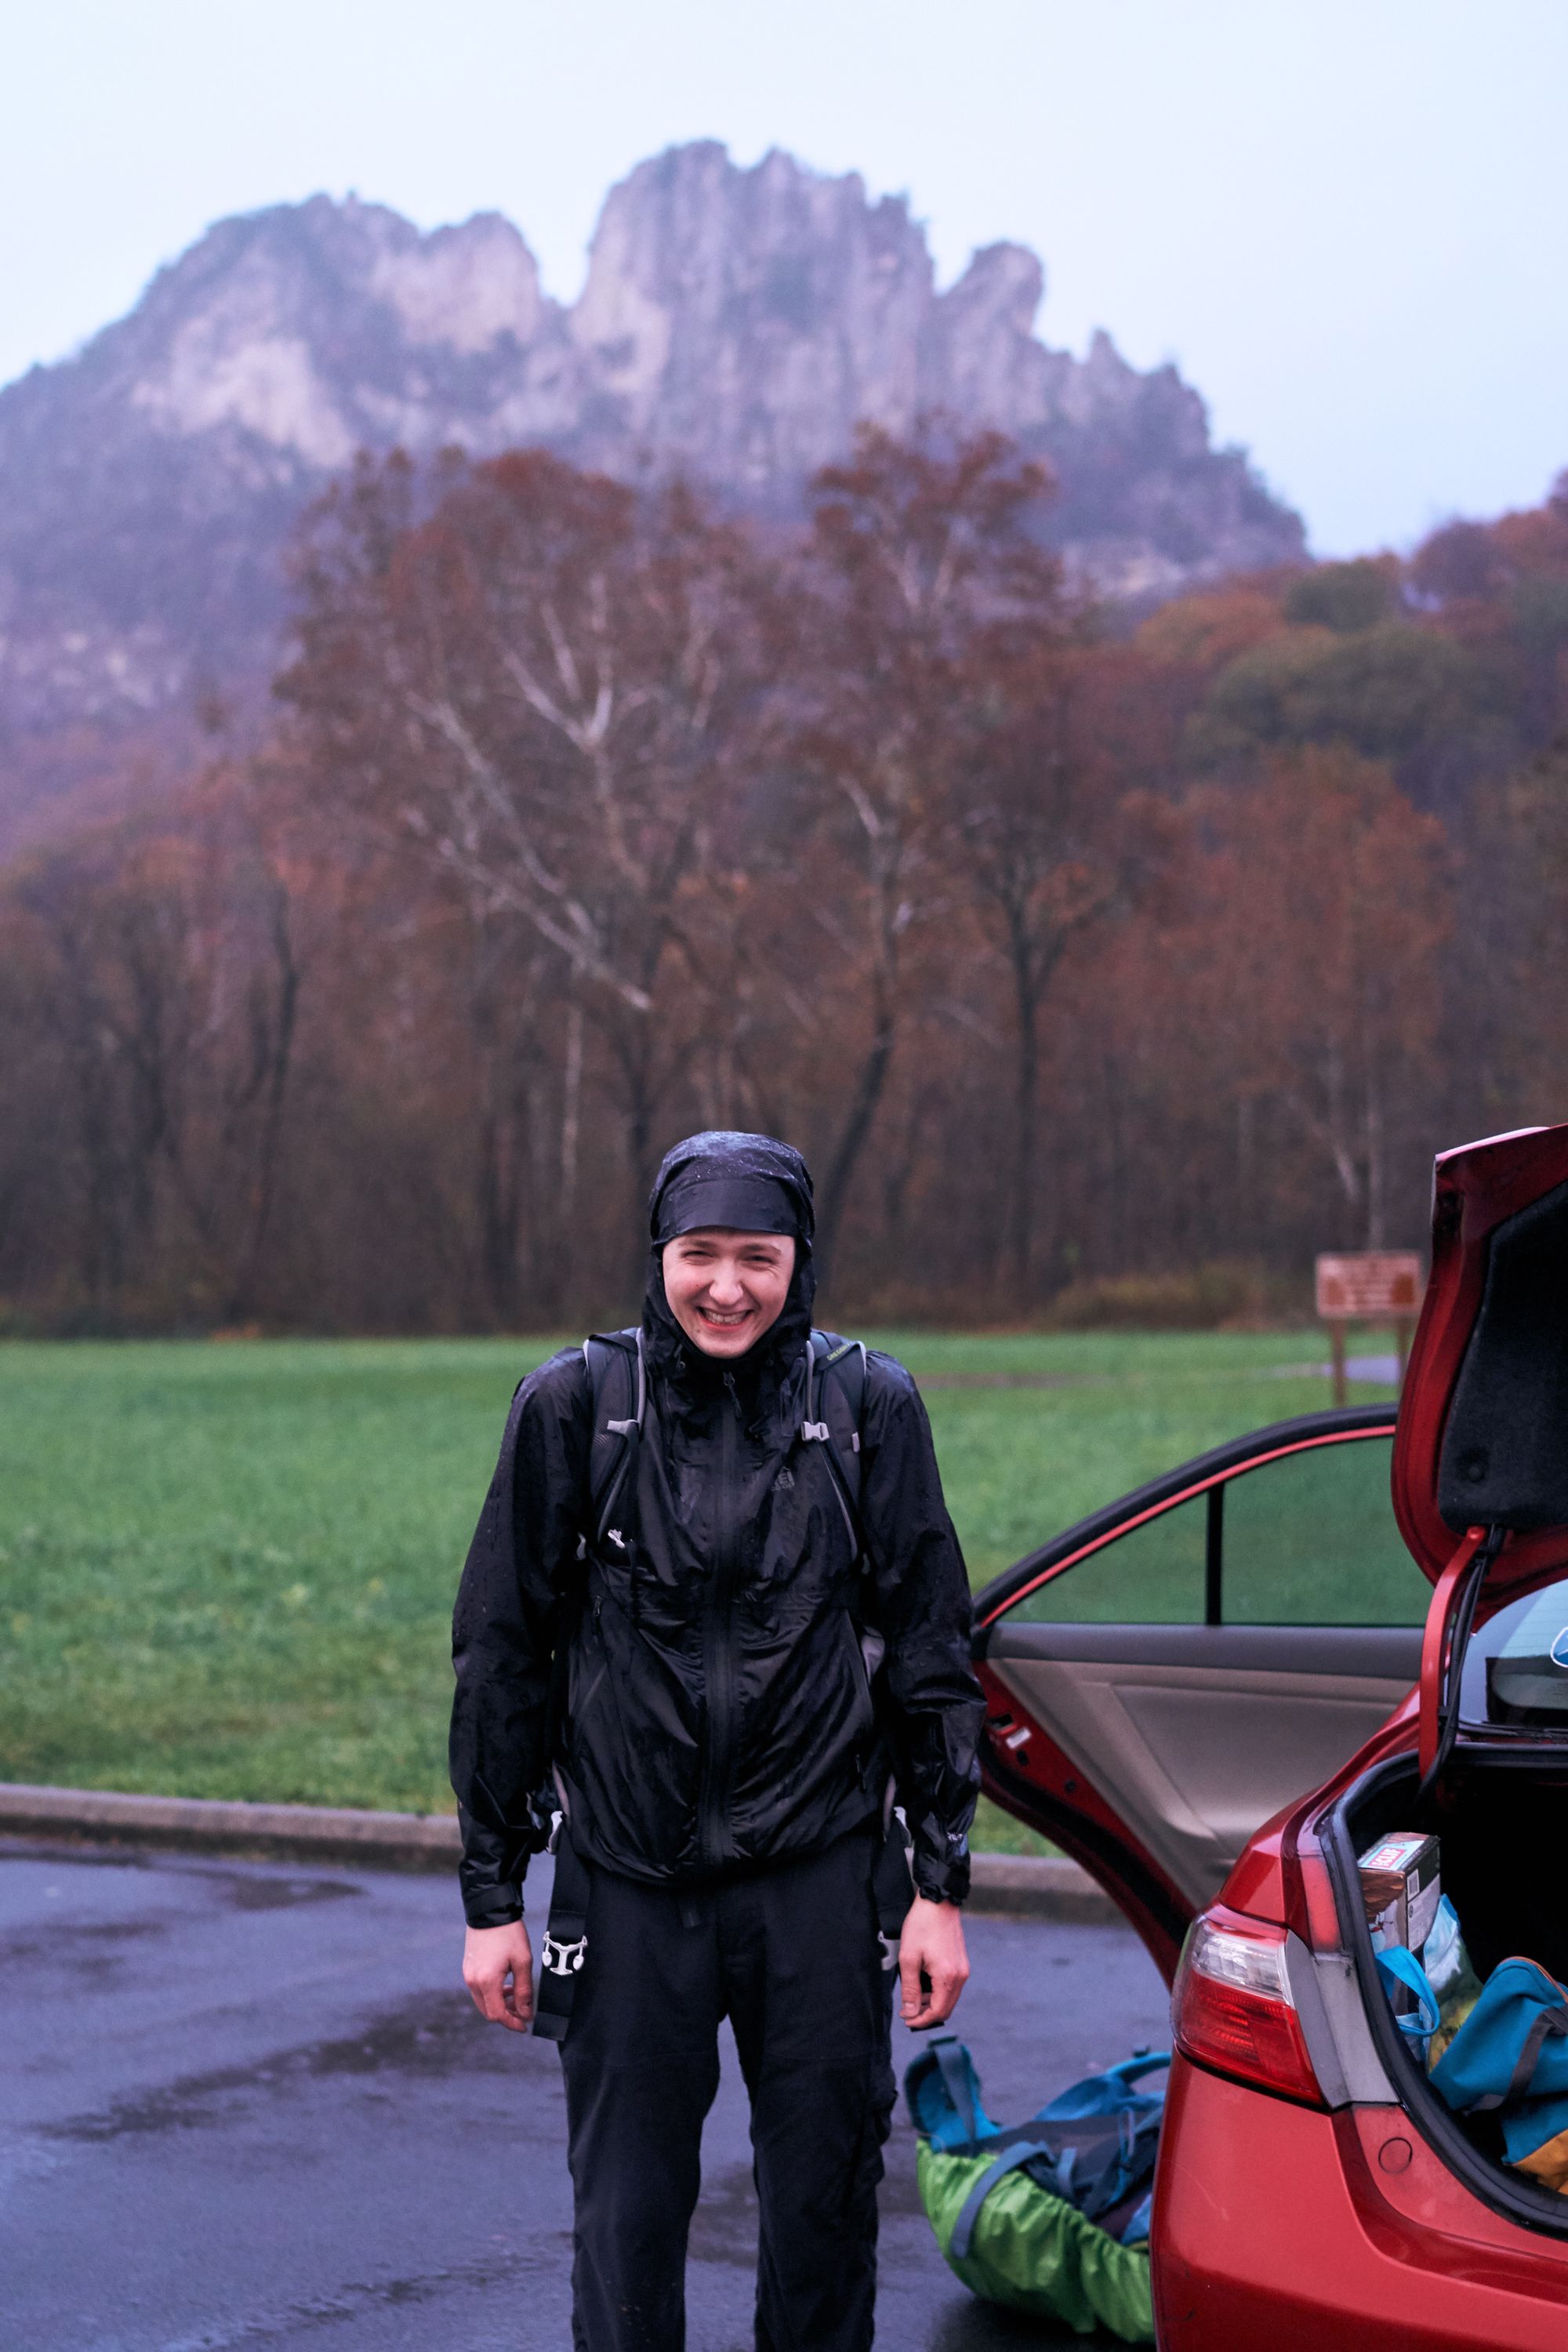 Steve in a rainjacket at the parking lot, with the seneca rock structure a mile behind him.